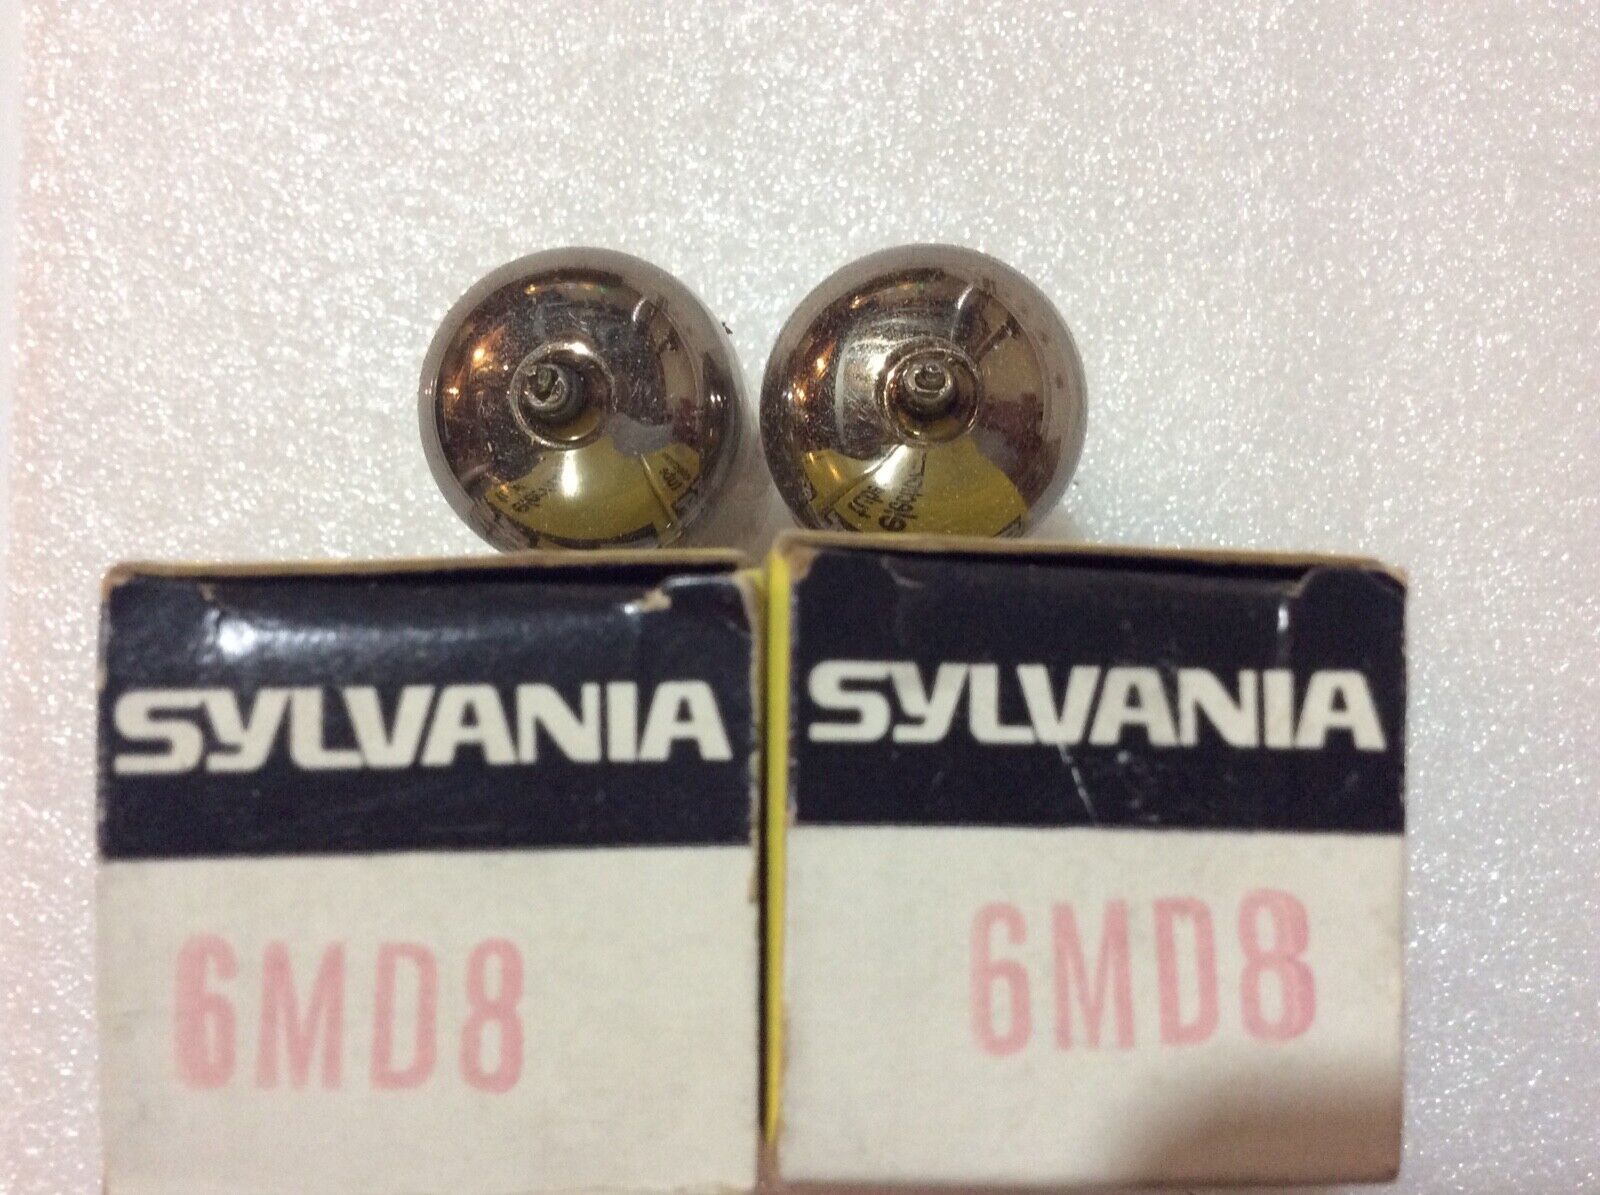 6MD8 Lot of Two (2) Sylvania Tubes NOS NIB Same Codes Top Halo Foil Getters - $7.25